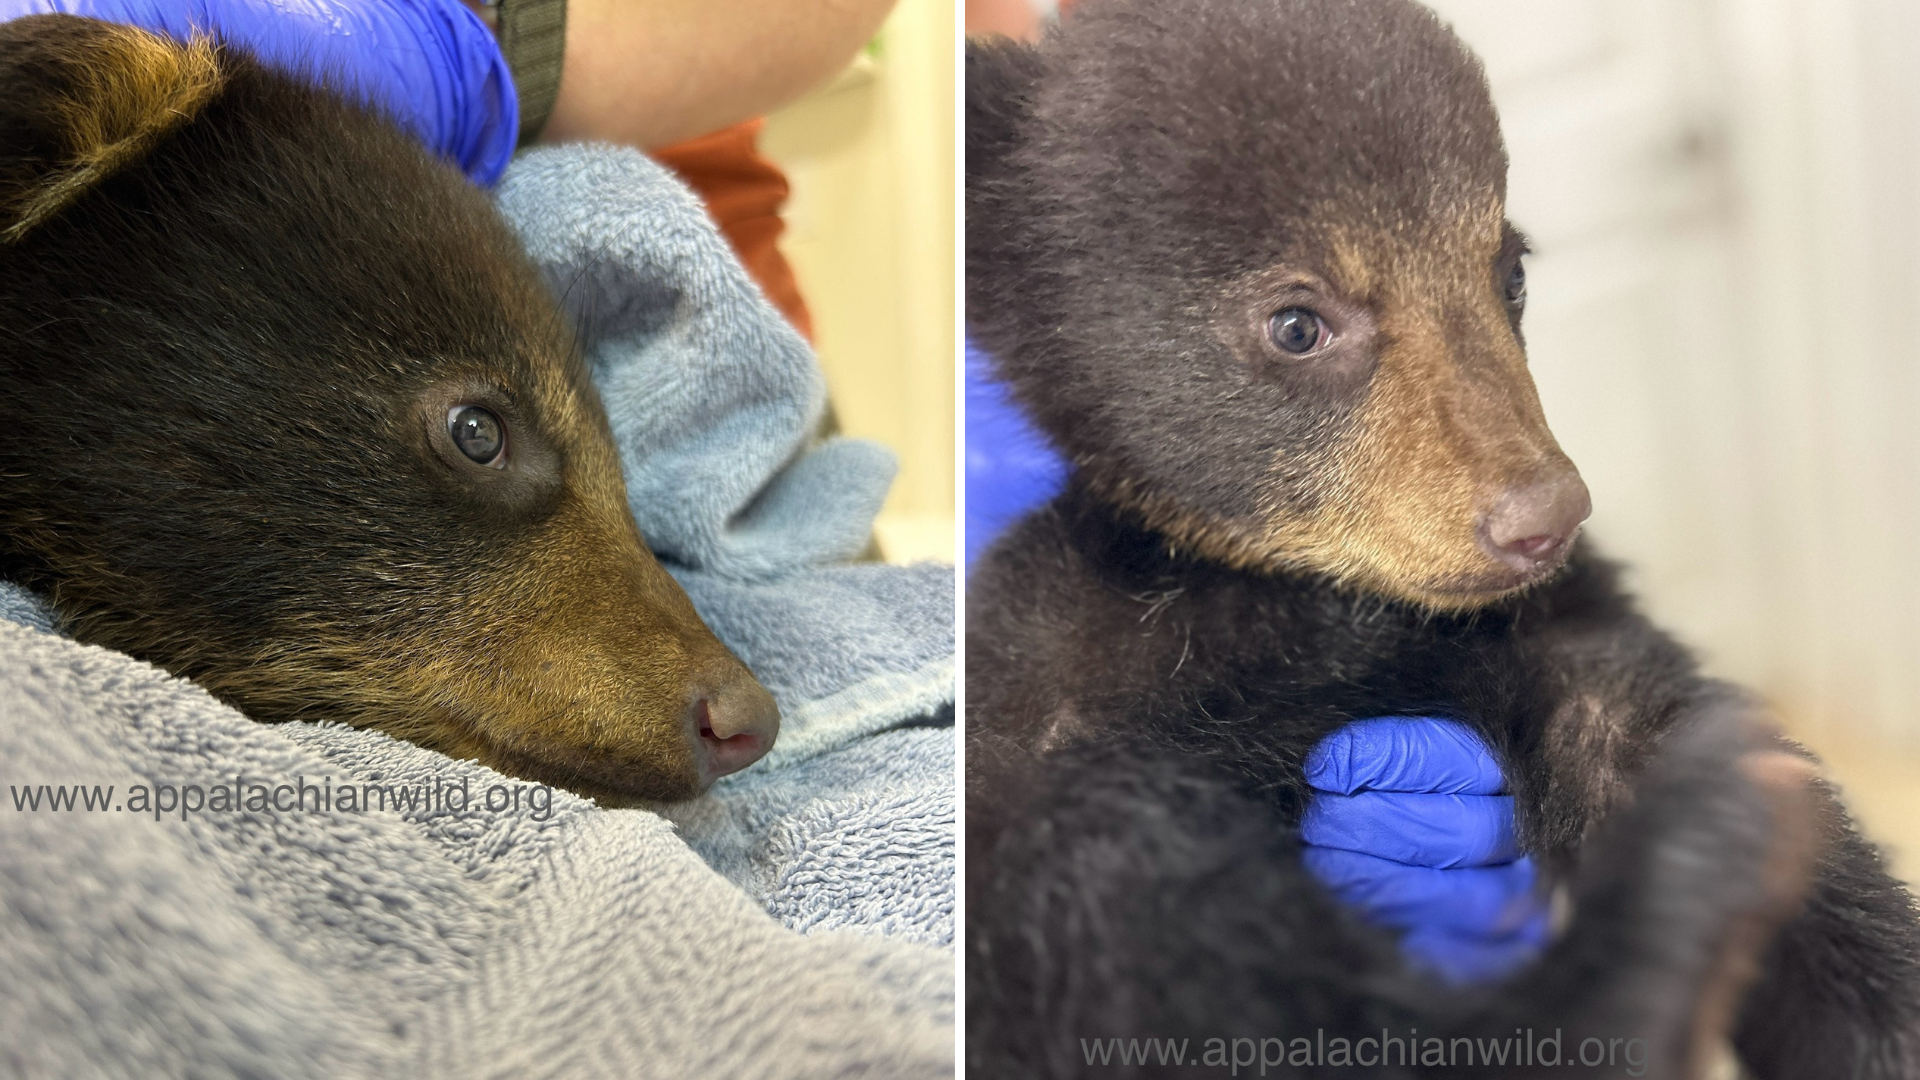 Orphaned bear cub thriving after rescue, wildlife refuge says